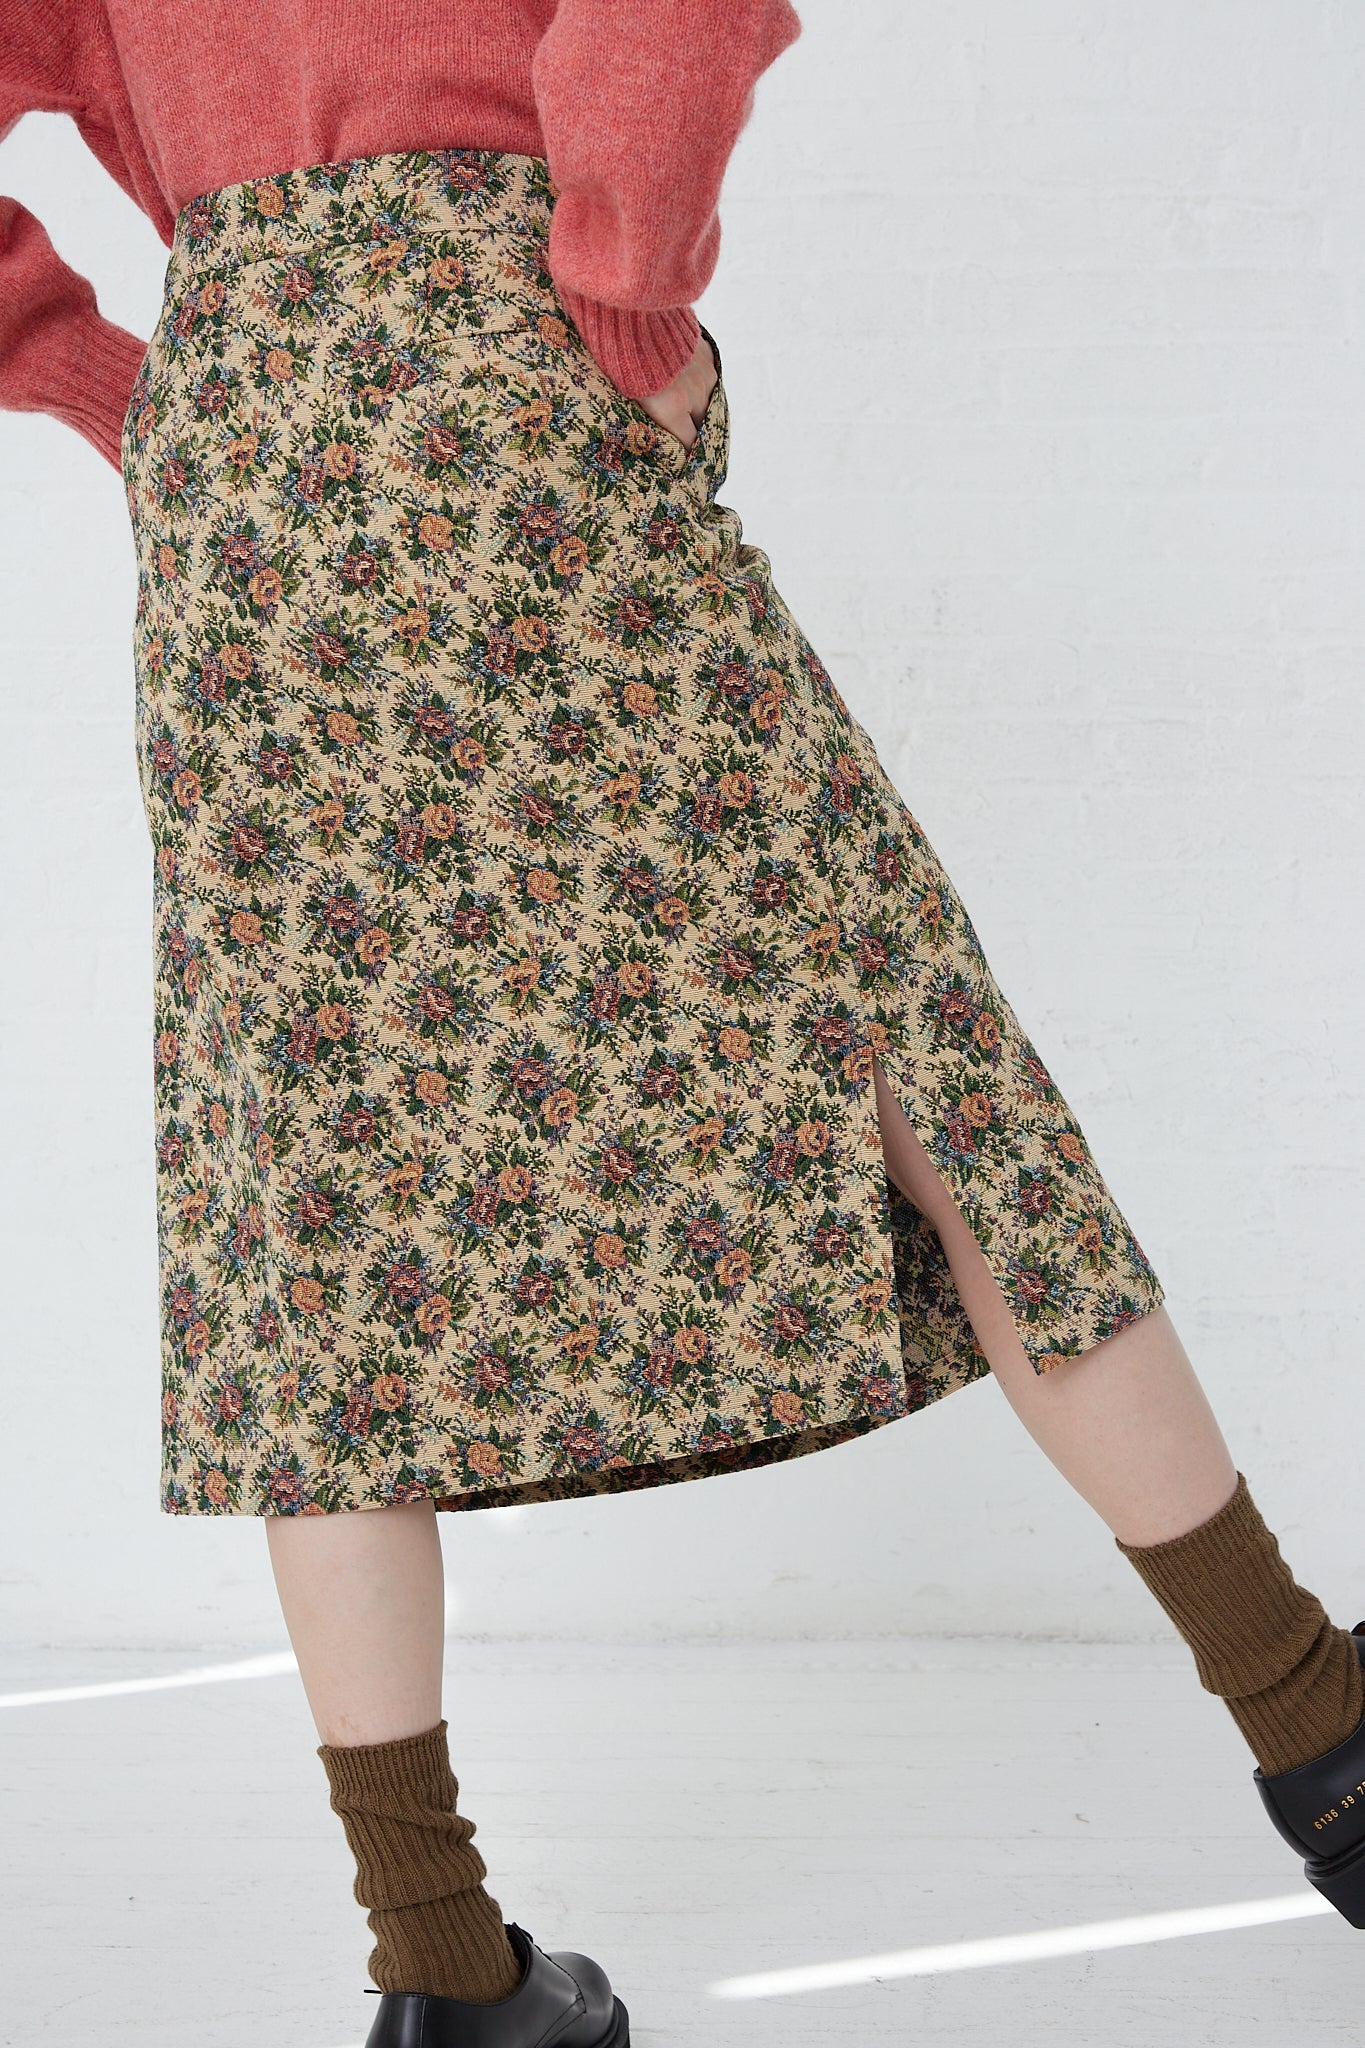 A woman wearing a Bless SMLXL Skirt No. 75 in Flower made of brocade cotton blend fabric.